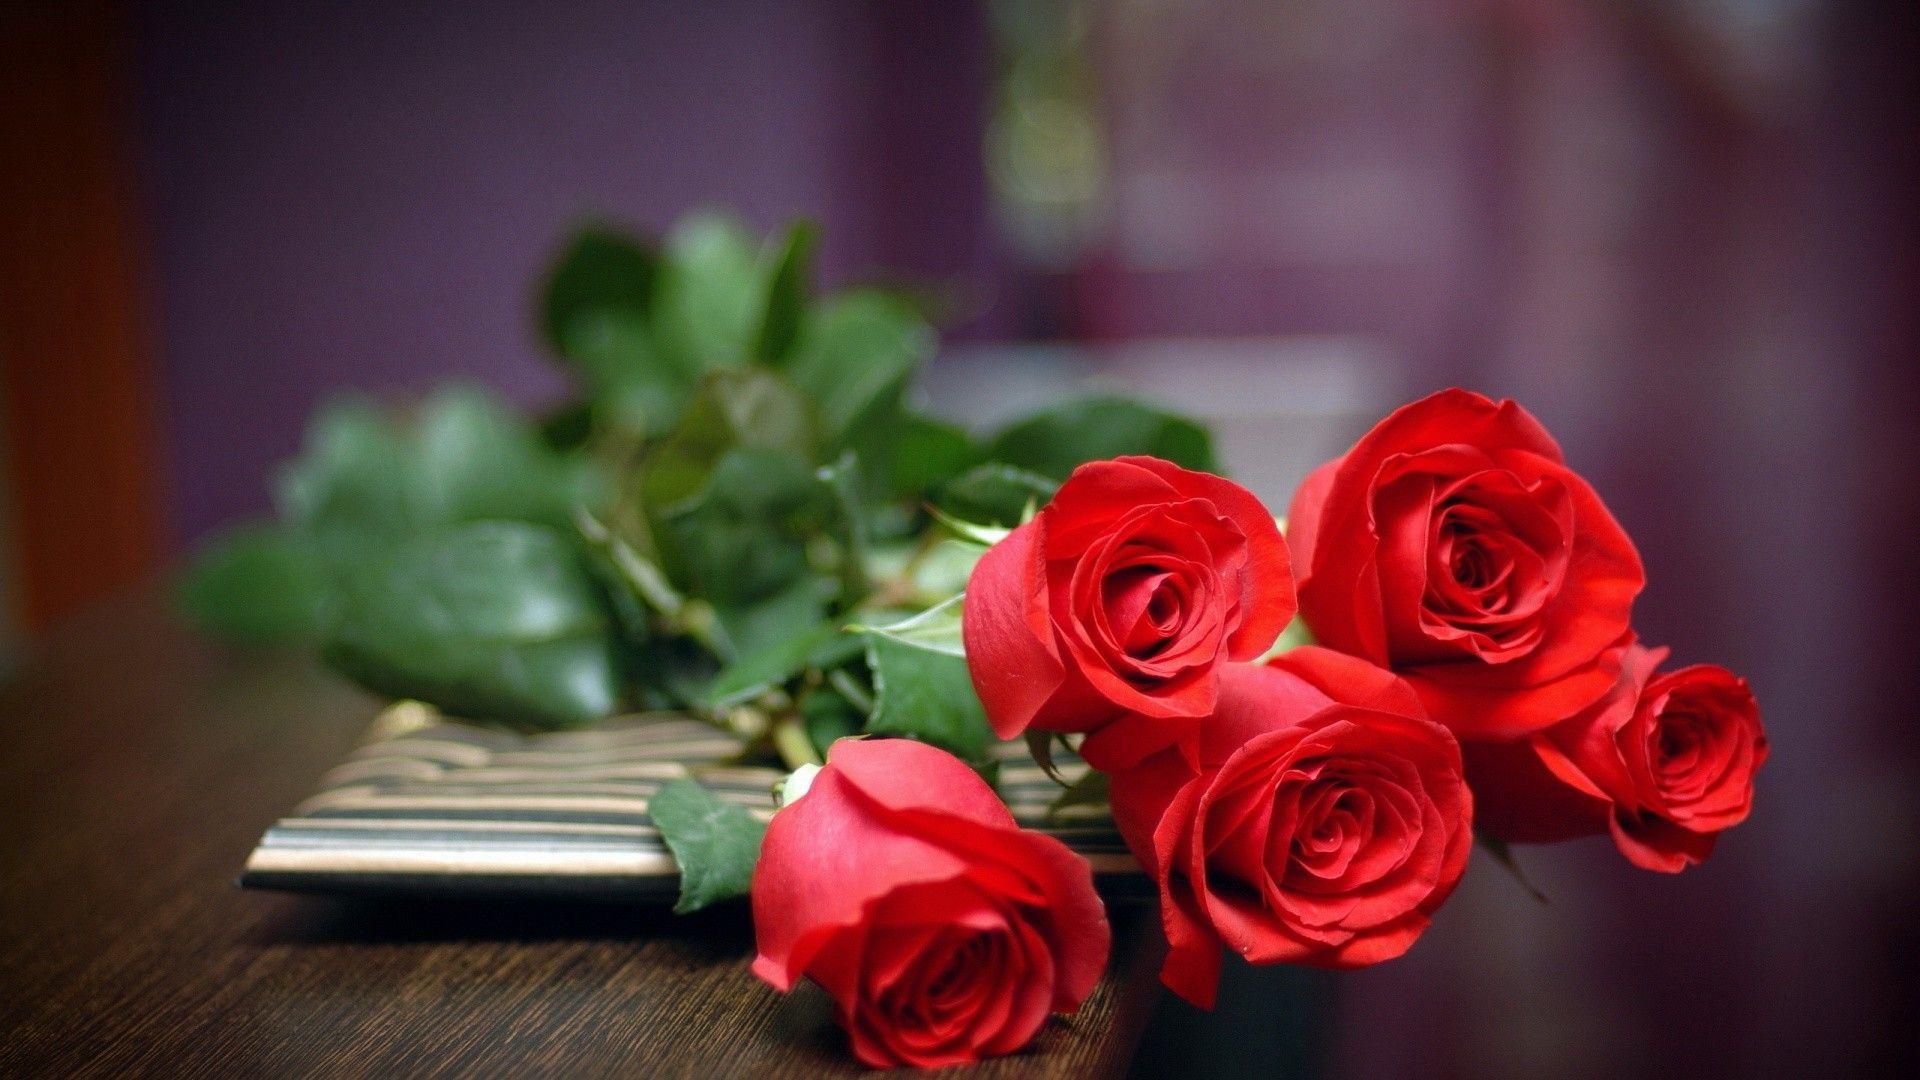 Best Red Rose Images Hd